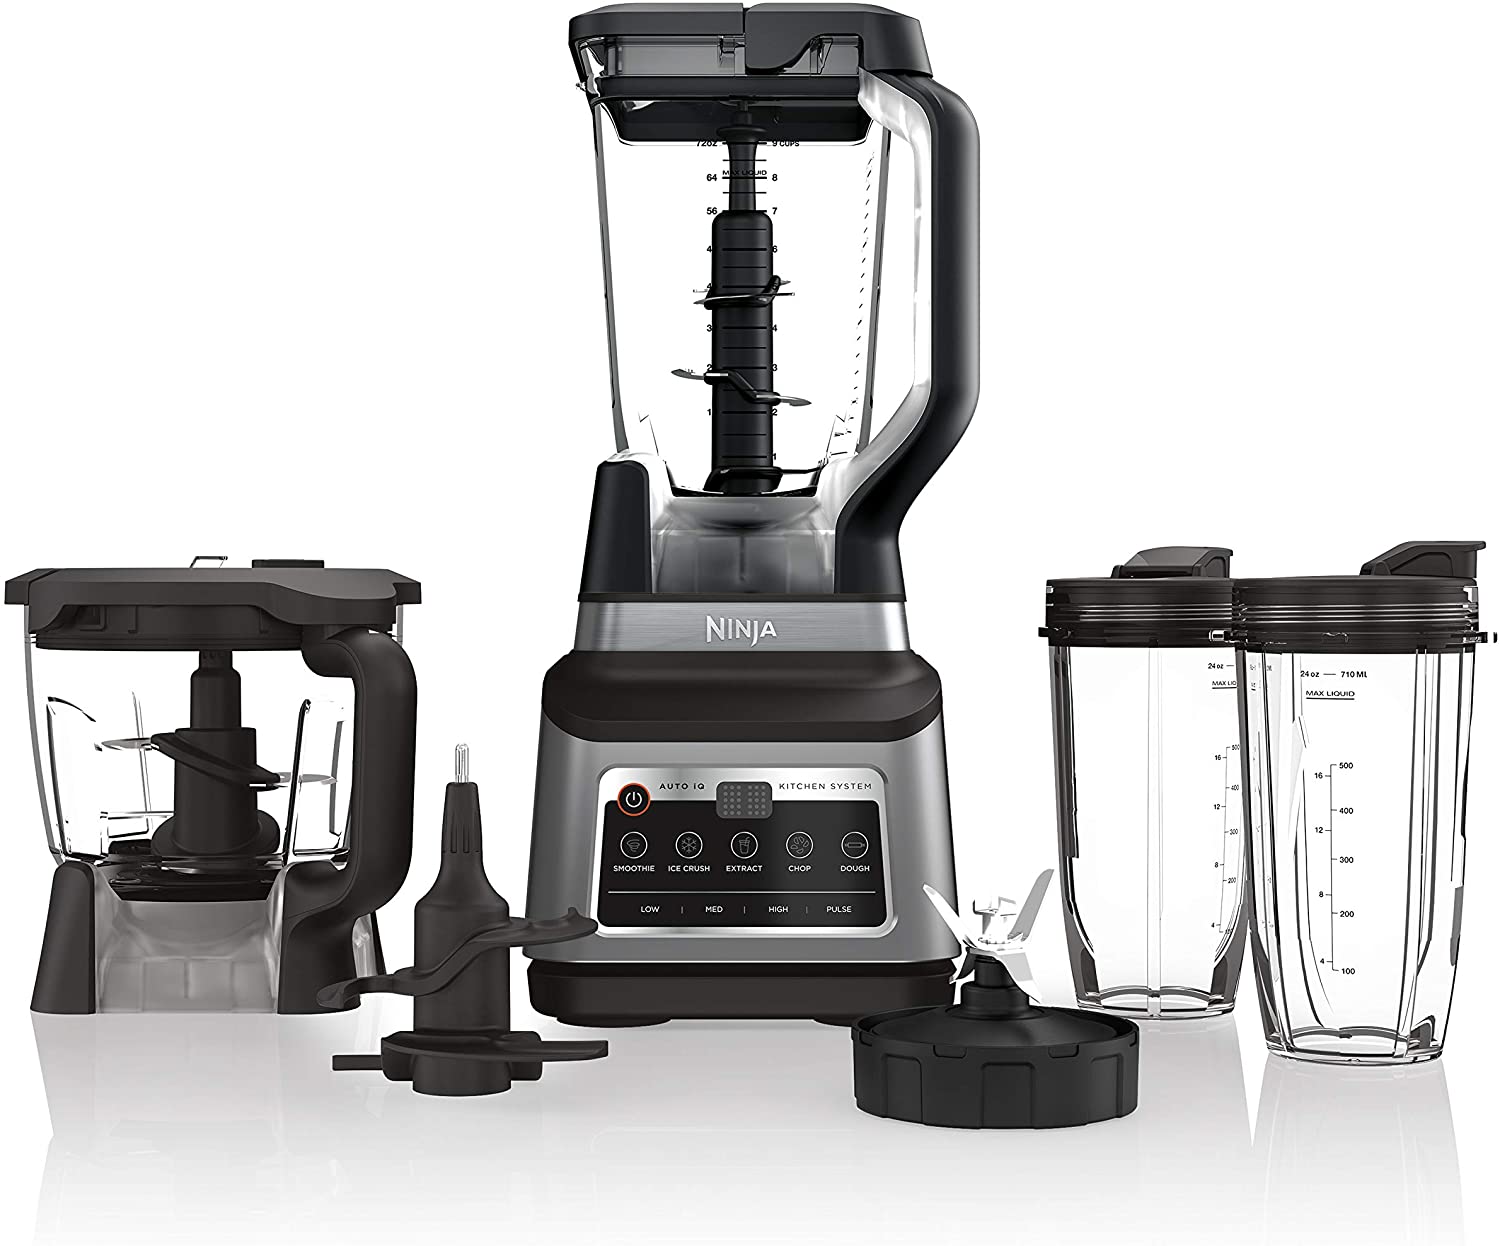 difference between ninja blender and food processor